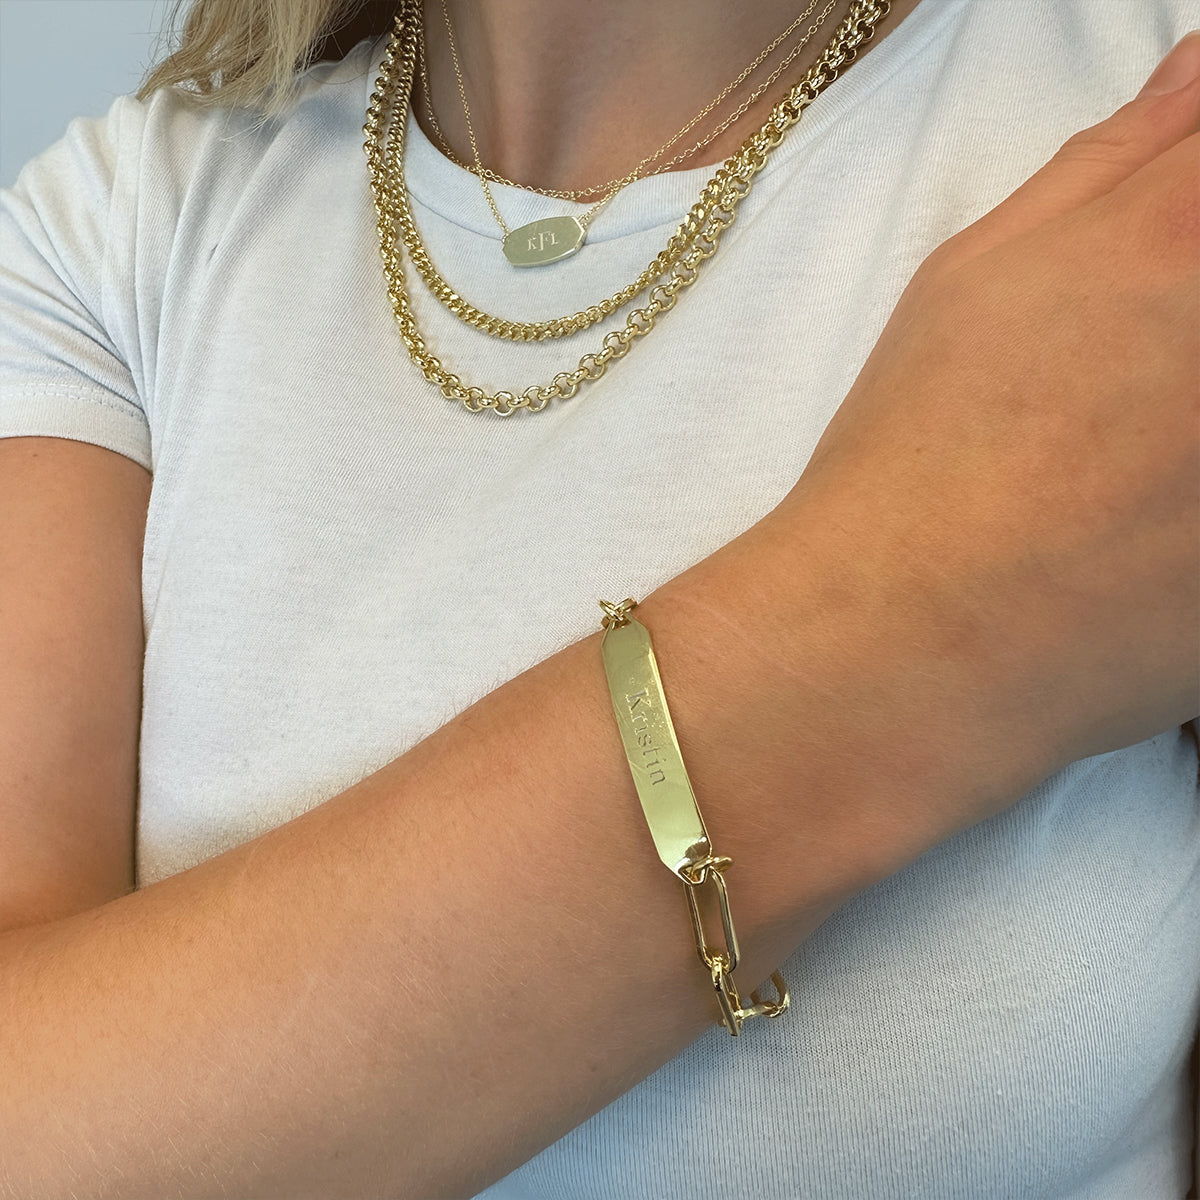 Chain and Bar Bracelet | Gold | Model Image 2 | Uncommon James